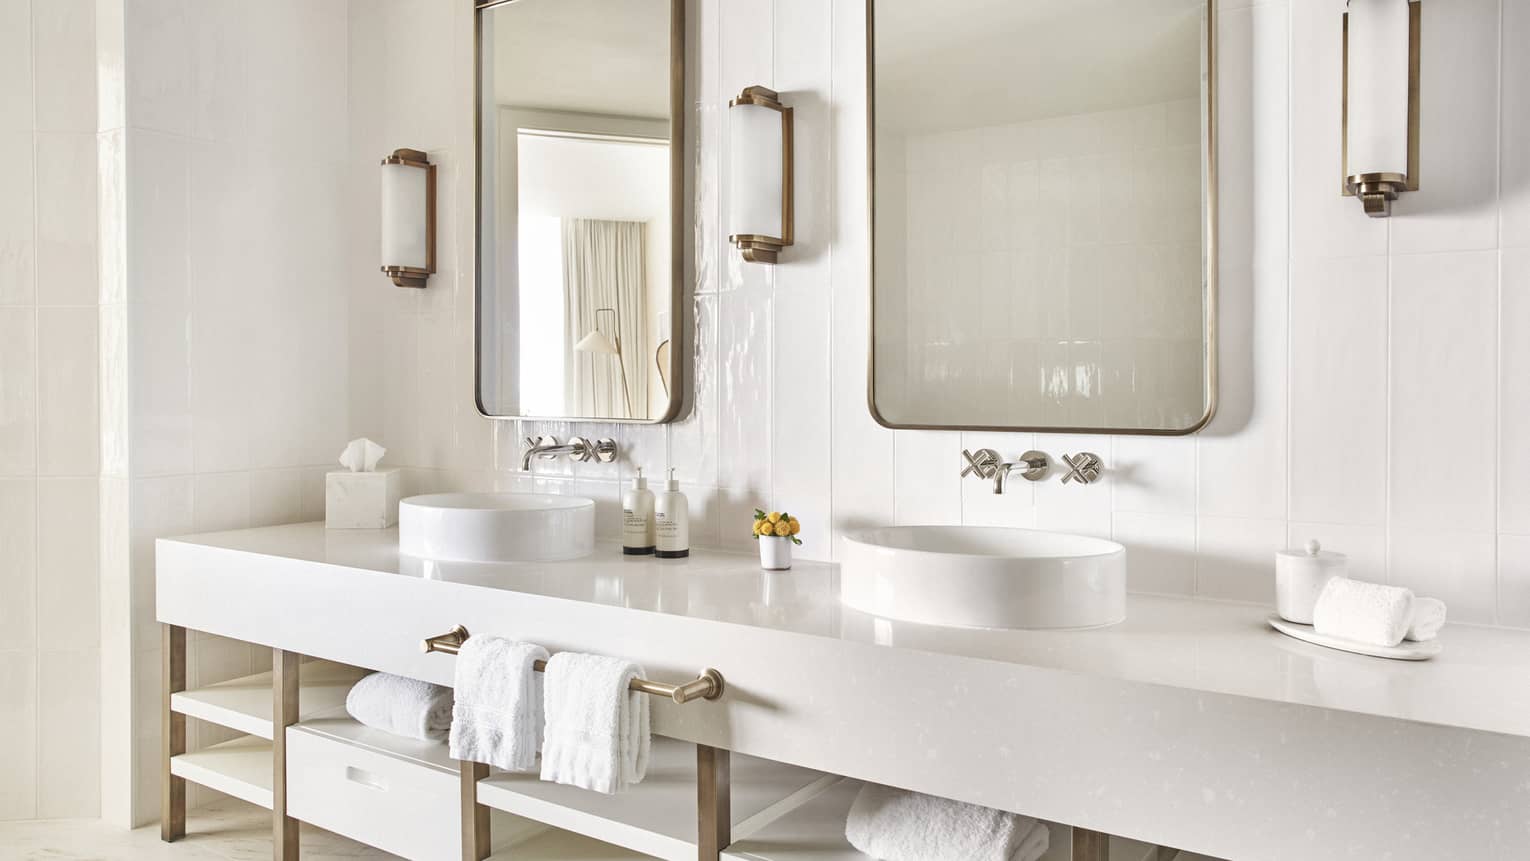 White bathroom with white double vanity, gold rimmed mirrors and wall sconces